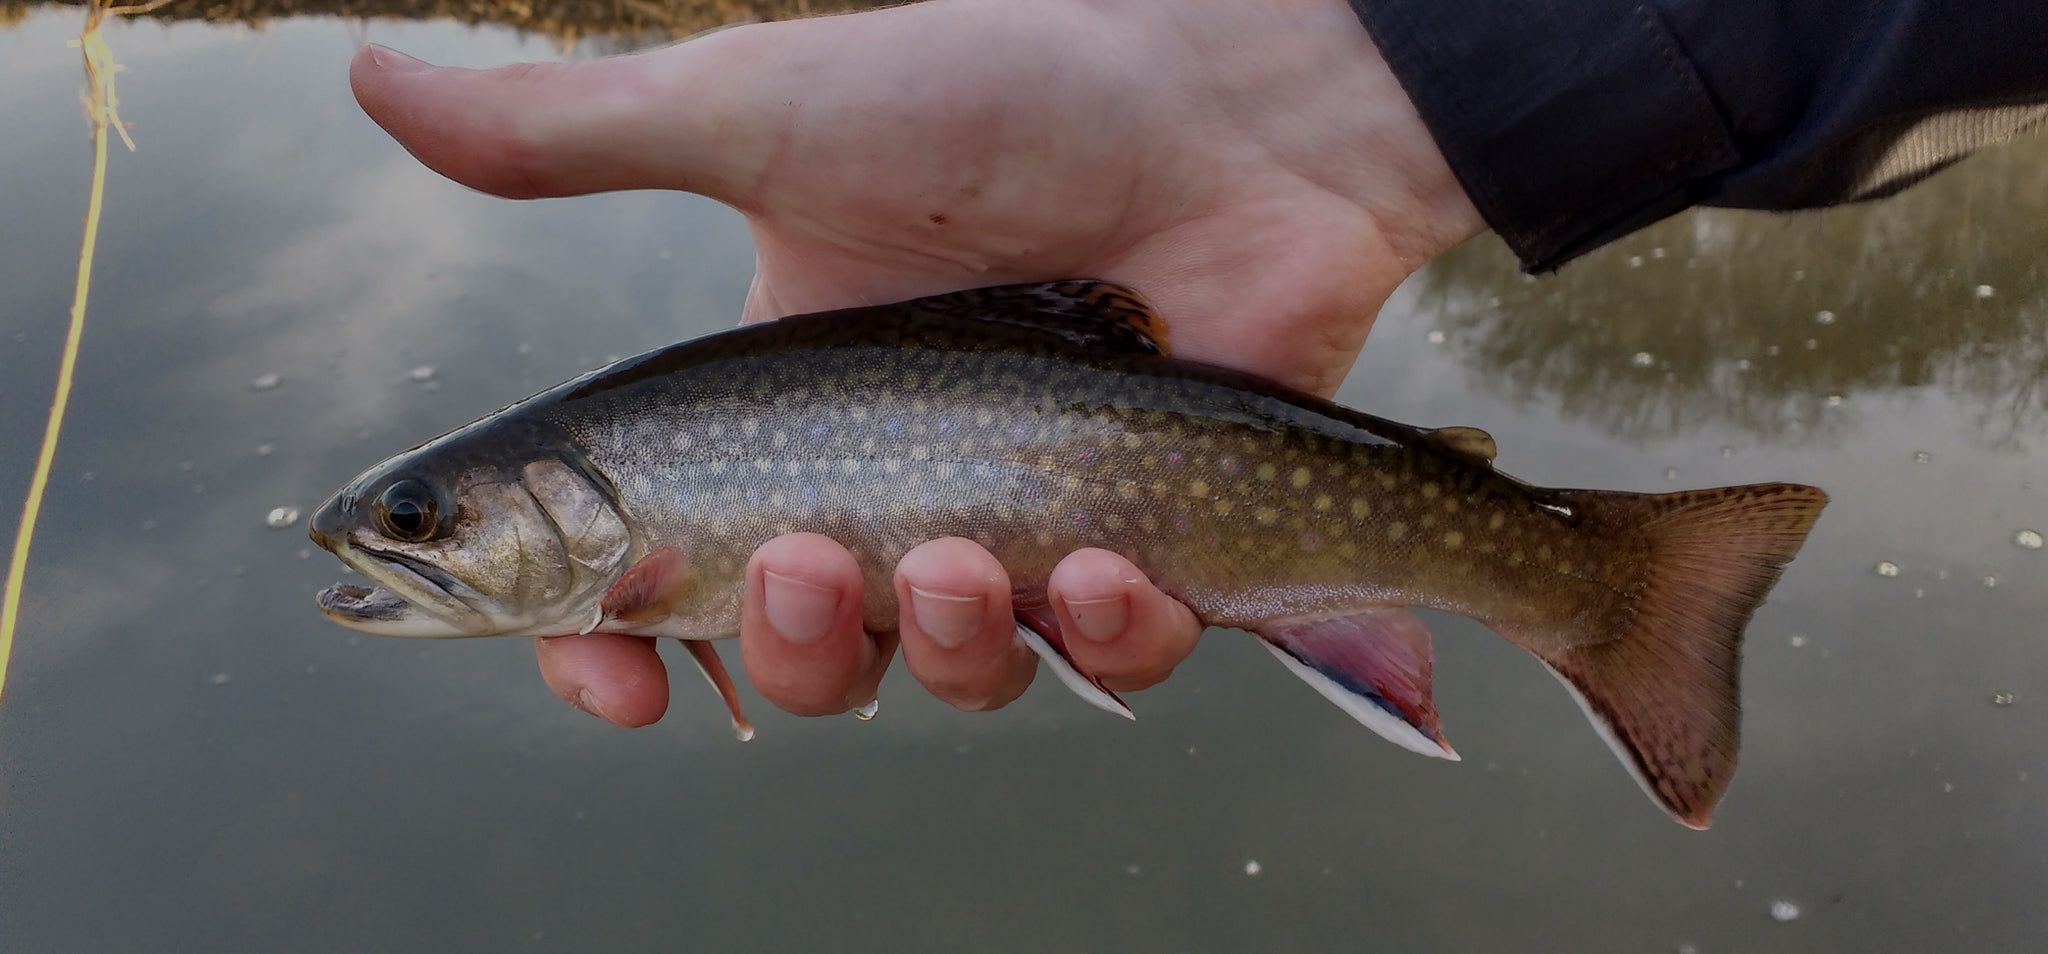 Fly Fishing: How To Approach Trout Streams With A Fly Rod